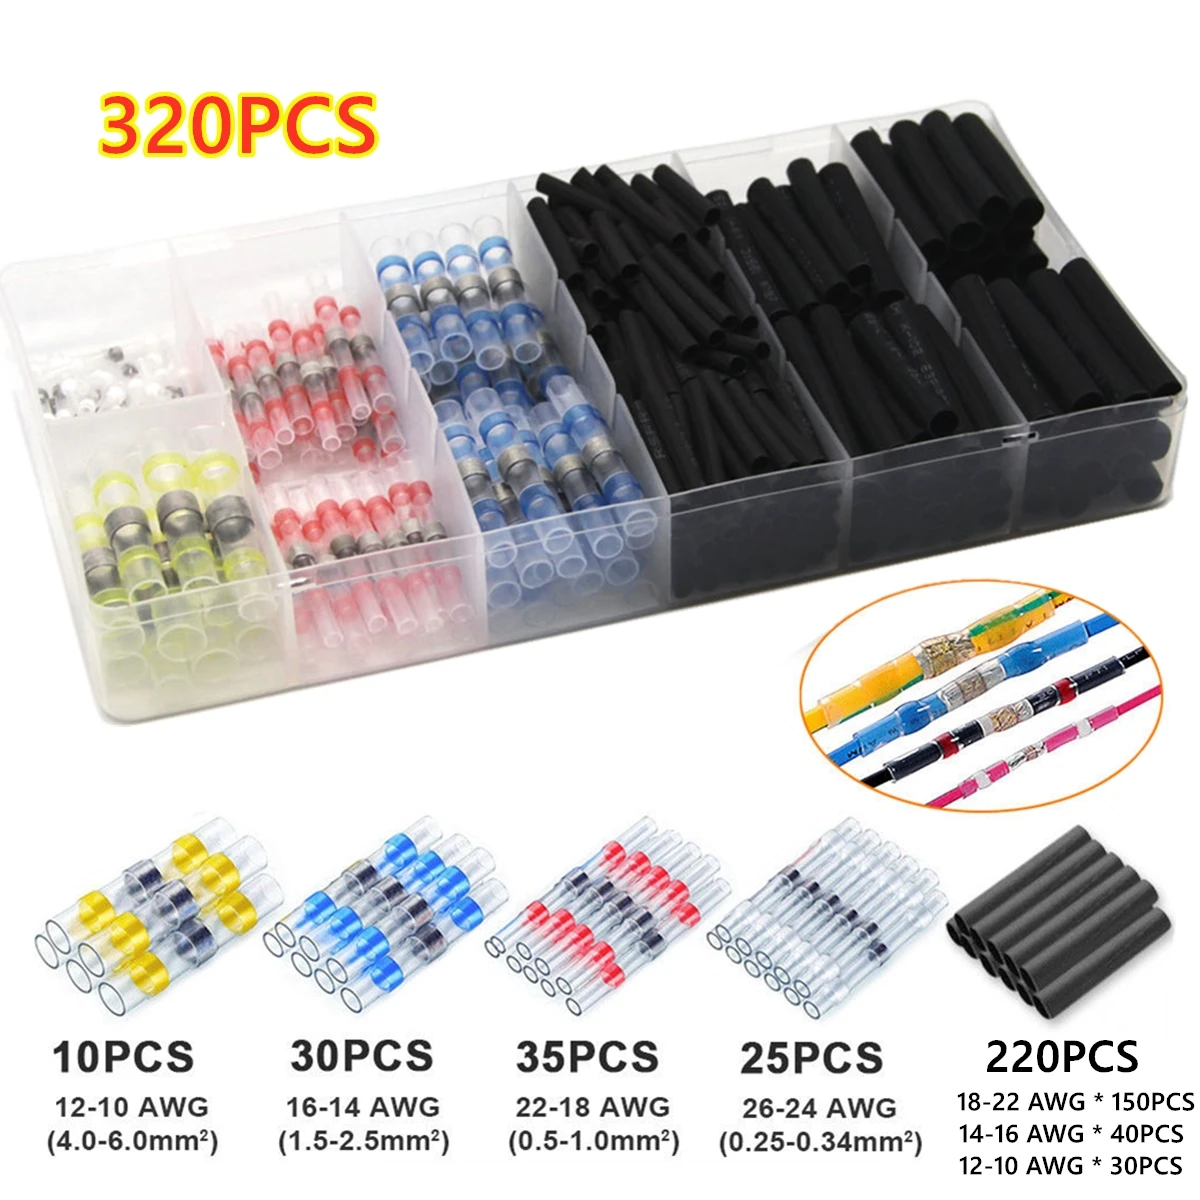 

320Pcs Waterproof Heat Shrink Seal Splice Terminals Solder Sleeve Wire Connectors 26-10 AWG Set Insulated Shrinkable Tubing Kit